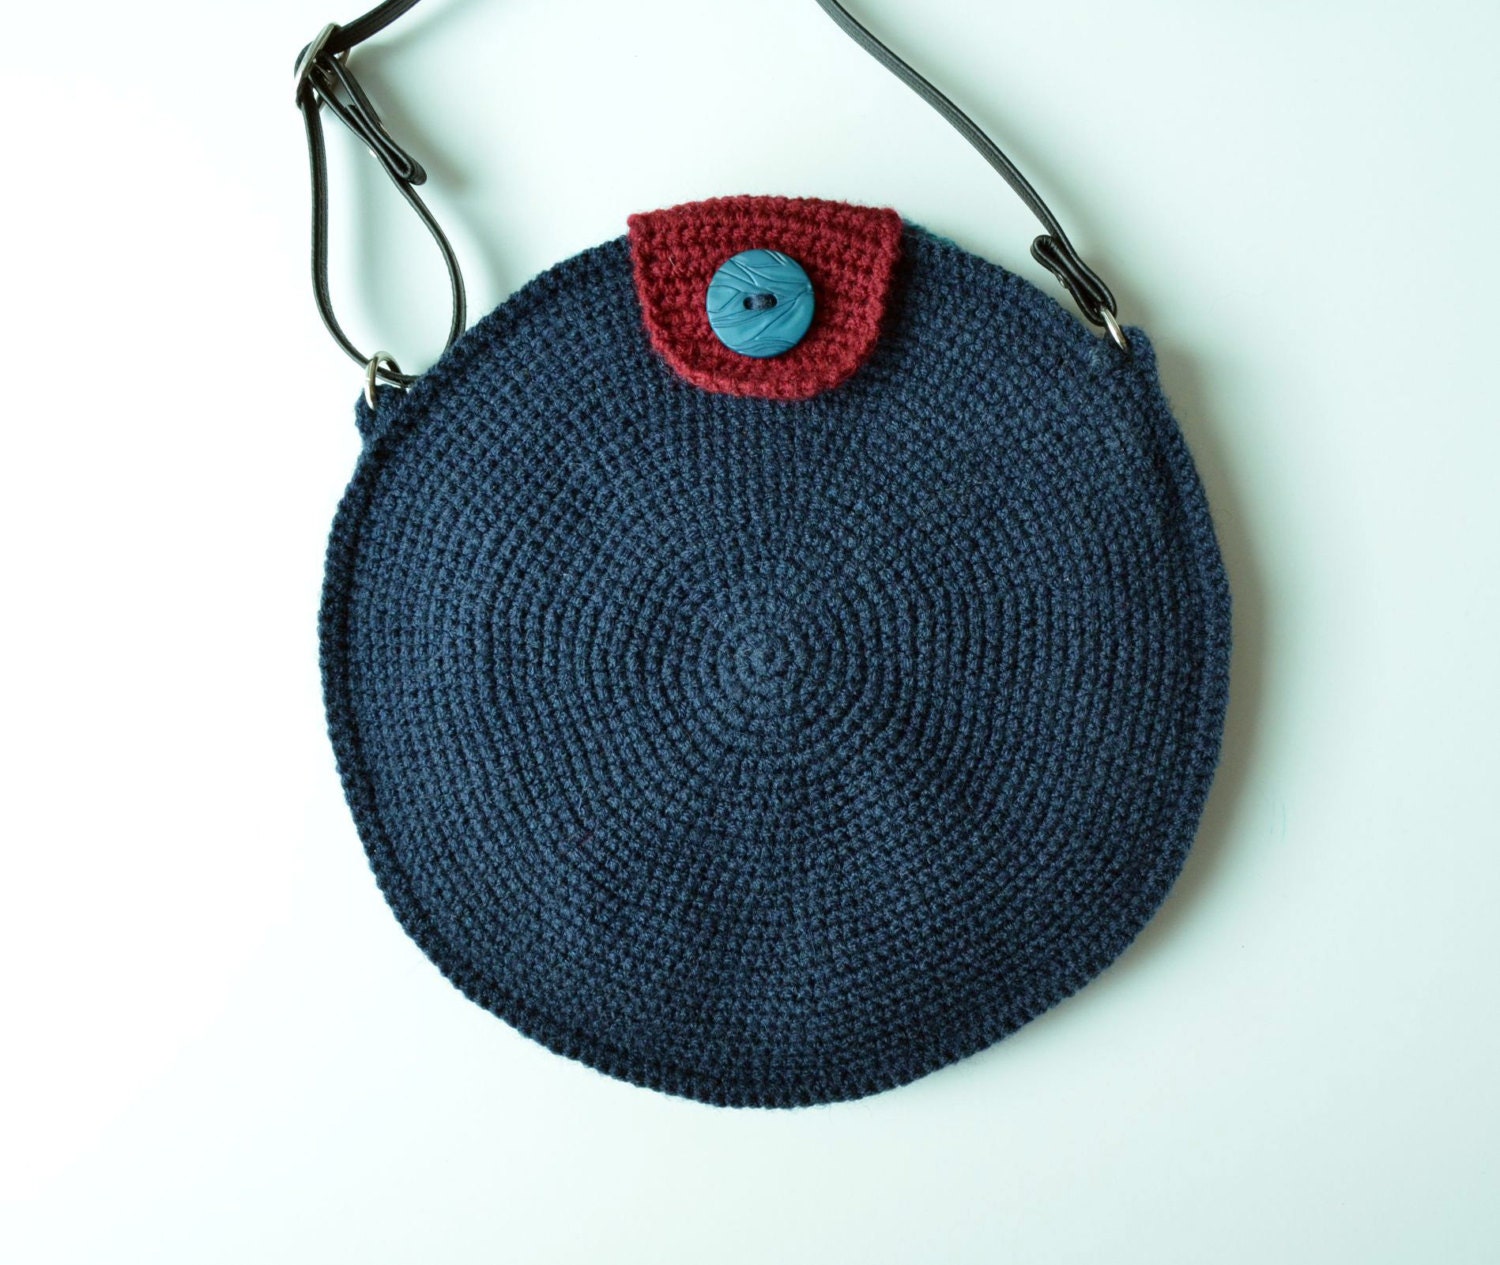 Crocheted Bag PATTERN - Round purse with Mandala - overlay crochet - Small Crossbody bag with ...